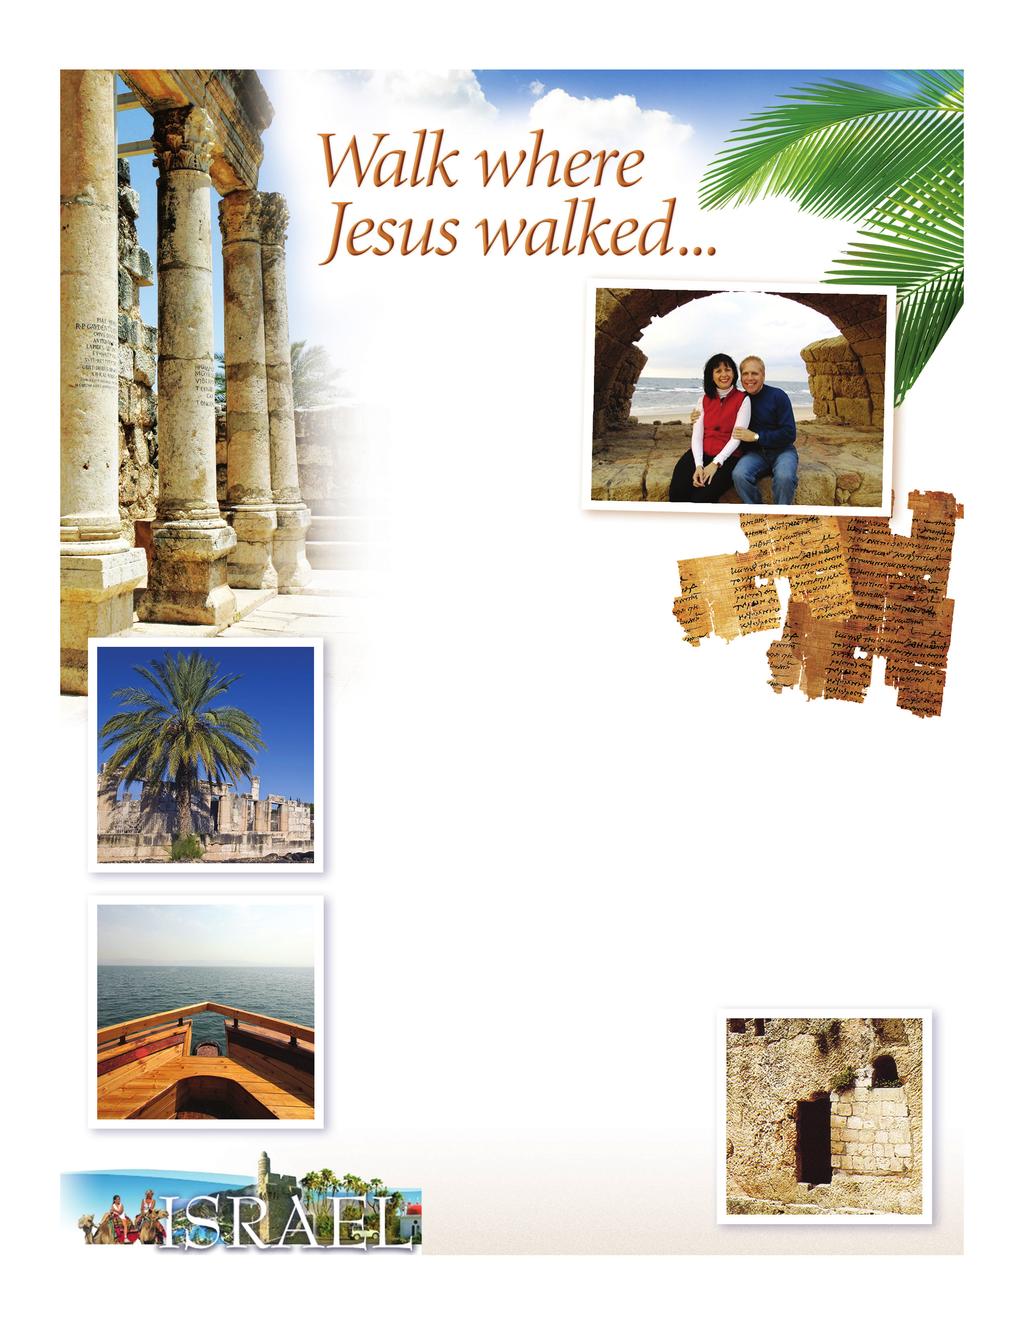 Join Pastor Larry Thompson and his wife, Cynthia, for a Journey to the Holy Land, March 6 15, 2014. Pastor Larry Thompson and his wife, Cynthia, invite you to join them on this journey of a lifetime!